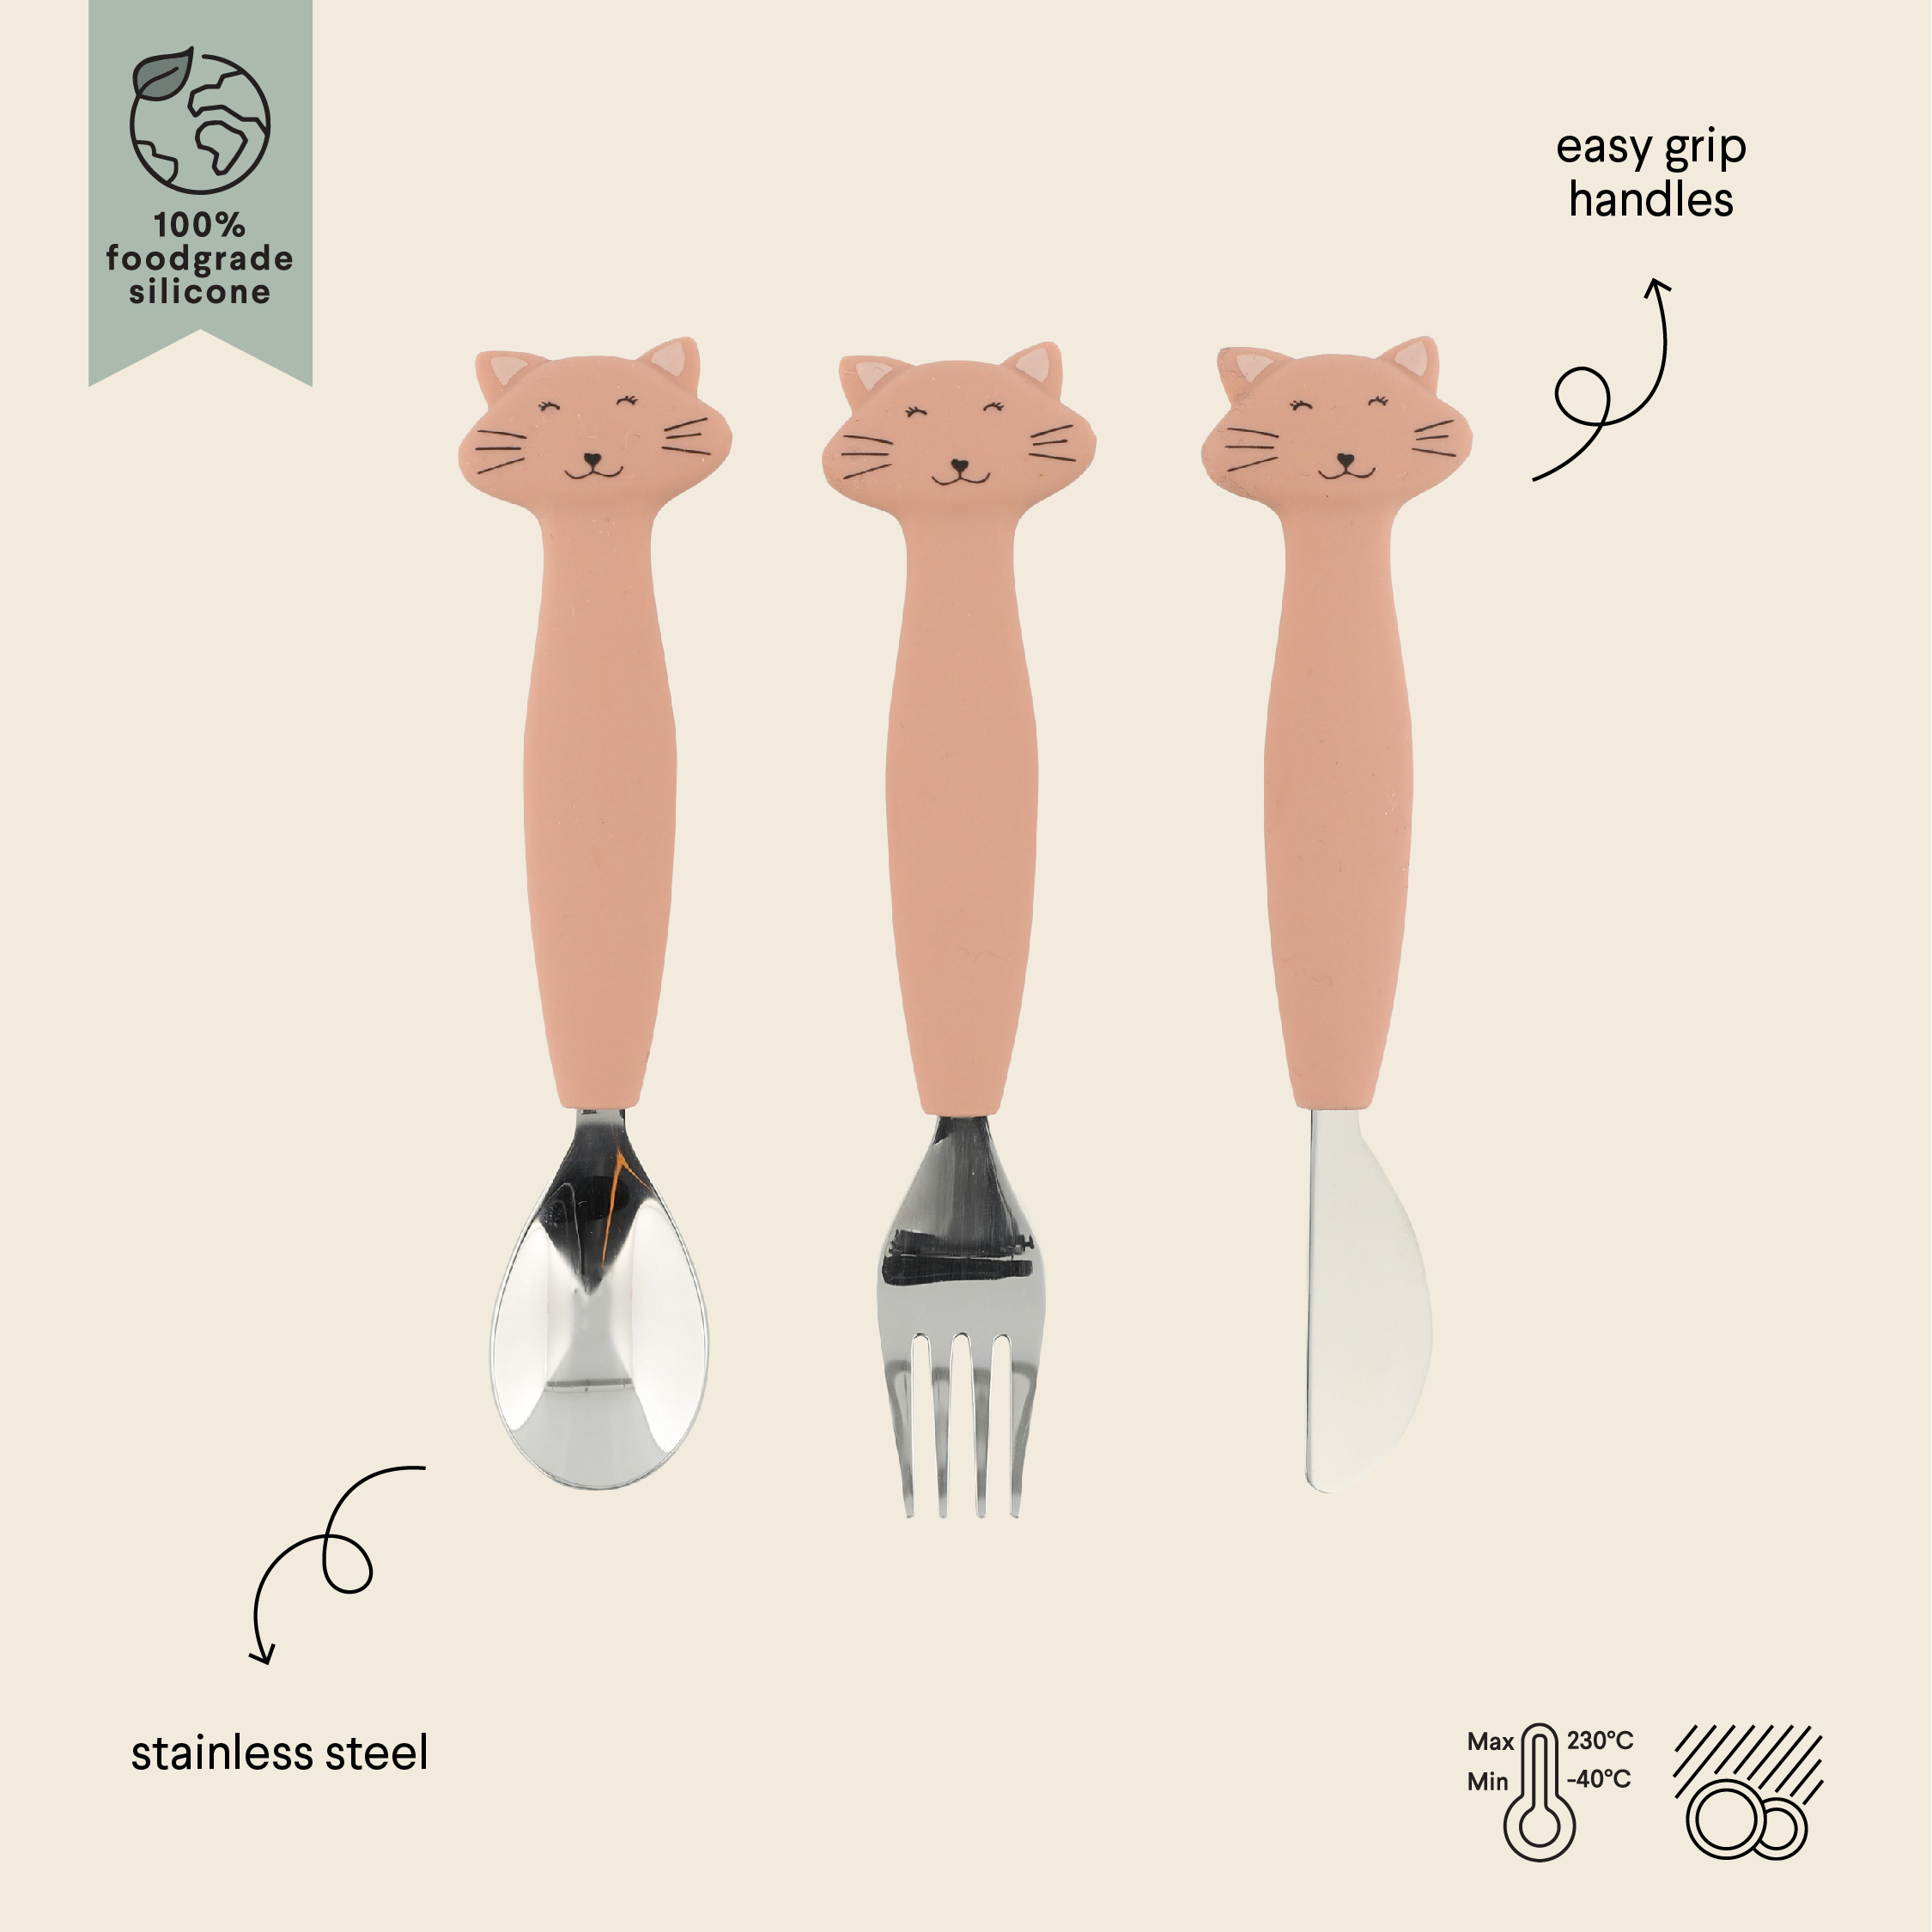 Silicone cutlery set 3-pack - Mrs. Cat